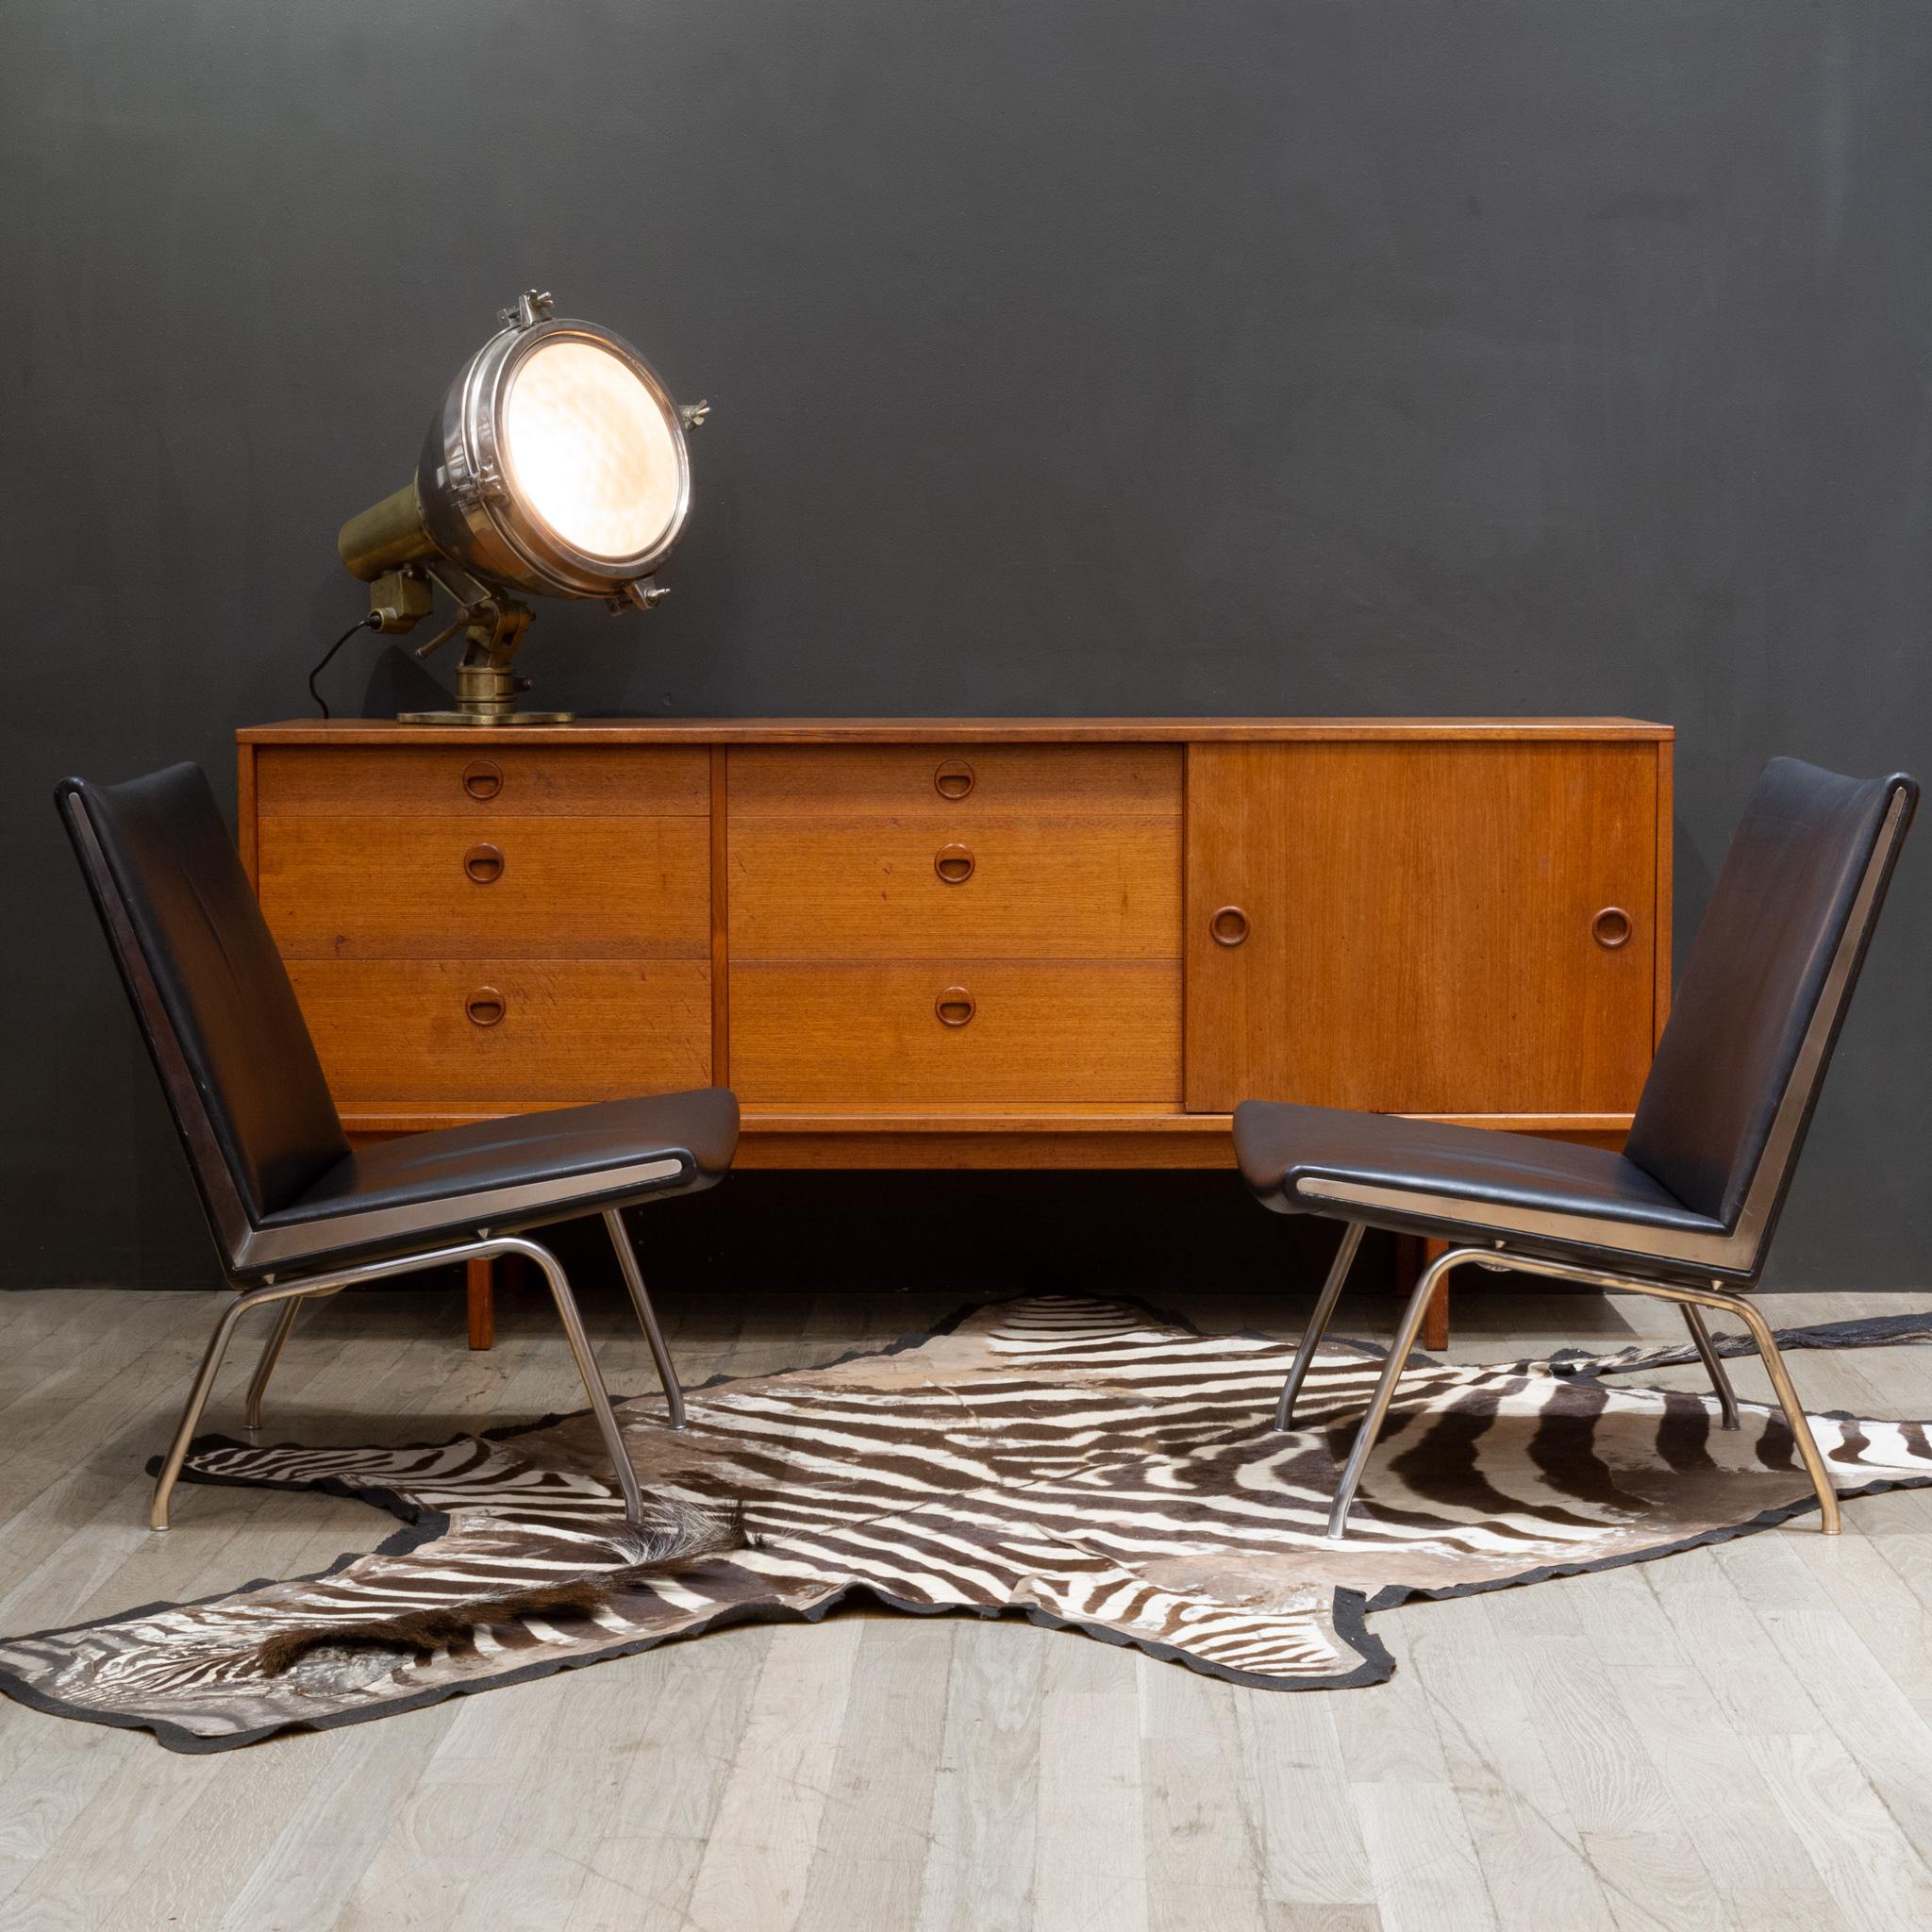 ABOUT

Revive your midcentury decor with this vintage DUX credenza/sideboard from Sweden c.1960. Crafted from Teak and Beech, it features four large drawers and two small. One drawer is lined in felt with dividers for silverware. One tambour door